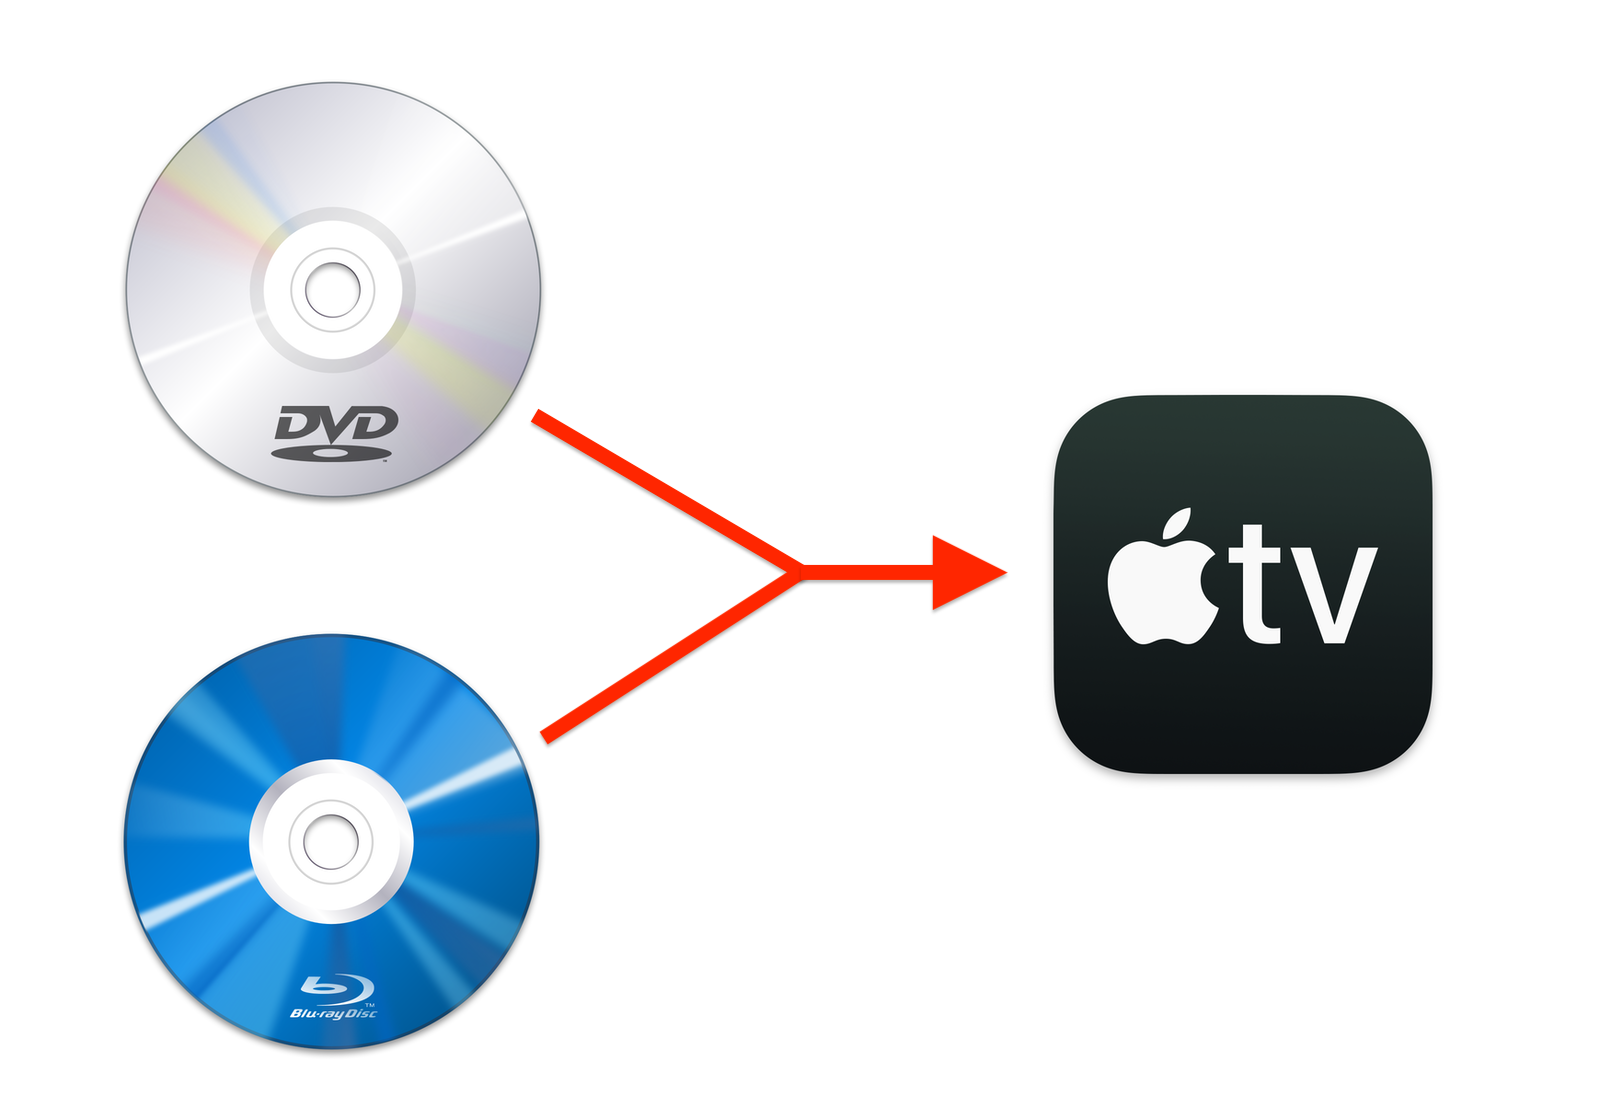 Convert your VHS tape to digital – file, DVD, or Blu-ray